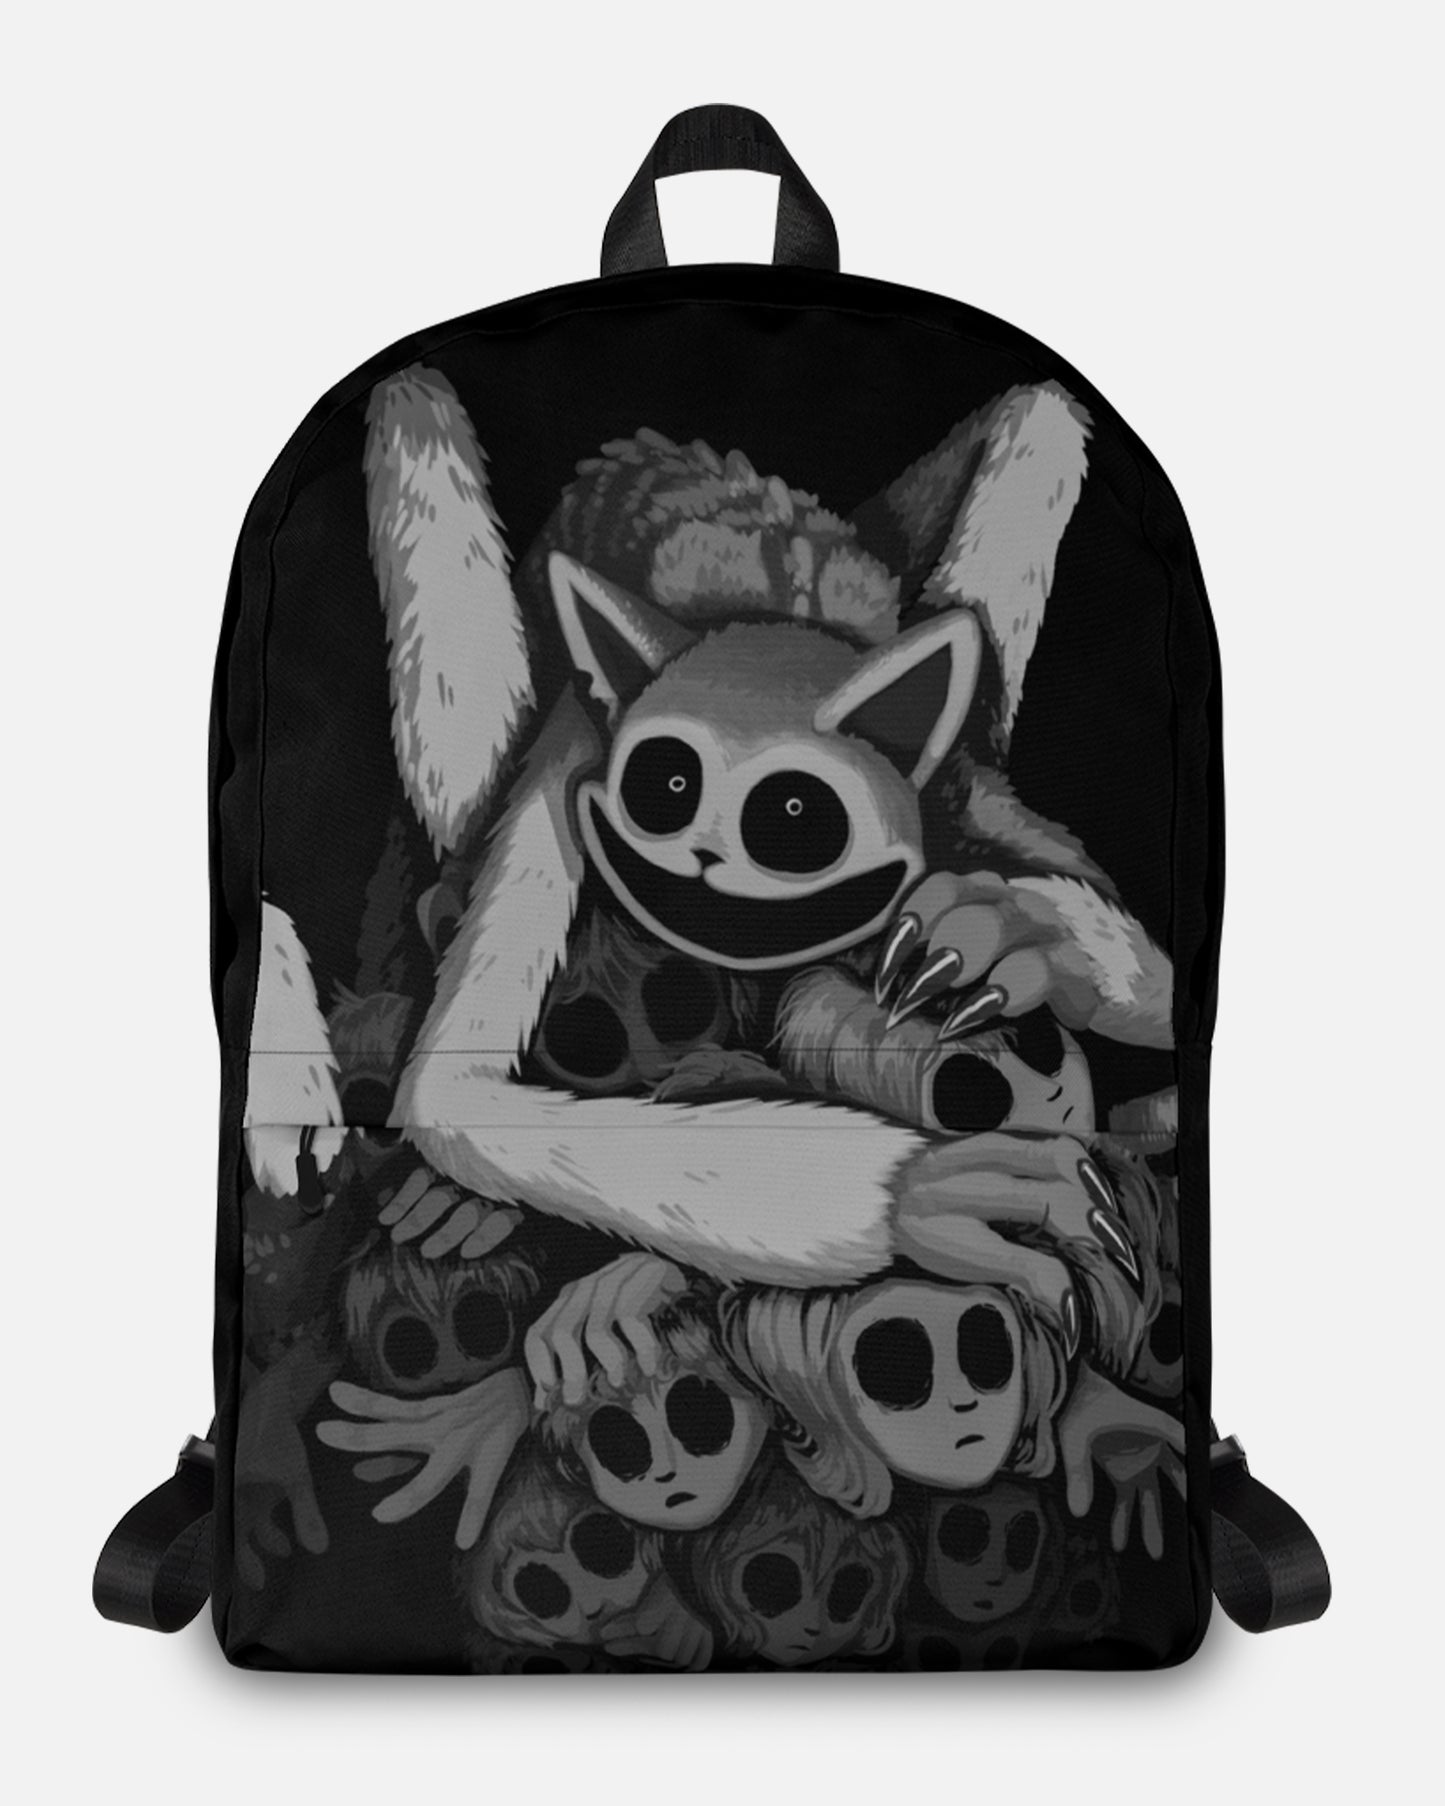 monster catnap kids faces backpack. image on backpack top: monster catnap sitting on pile of girl and boy kids faces with their hands reaching out. their eyes are empty. kids faces on are on bottom pocket of backpack.